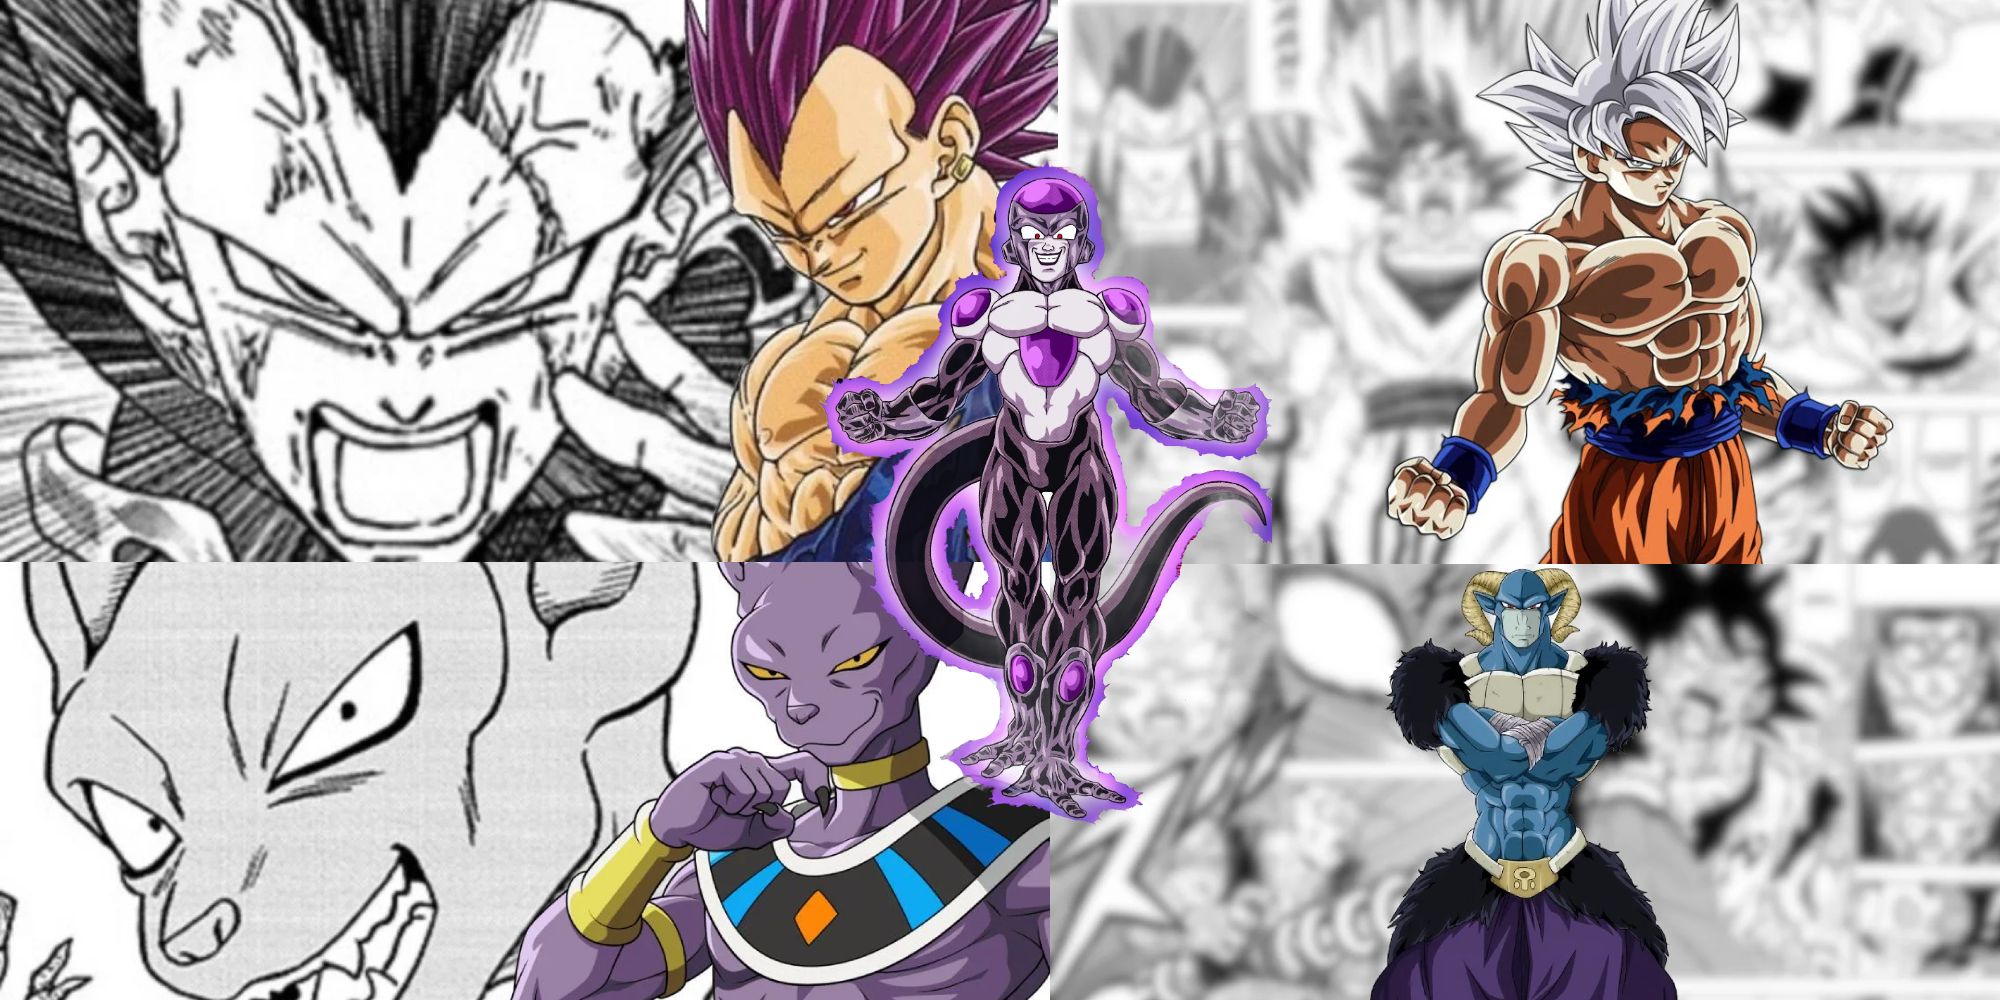 Cover Image For Characters Stronger Than Black Frieza With UE Vegeta, Beyond UI Goku, Beerus, And Moro